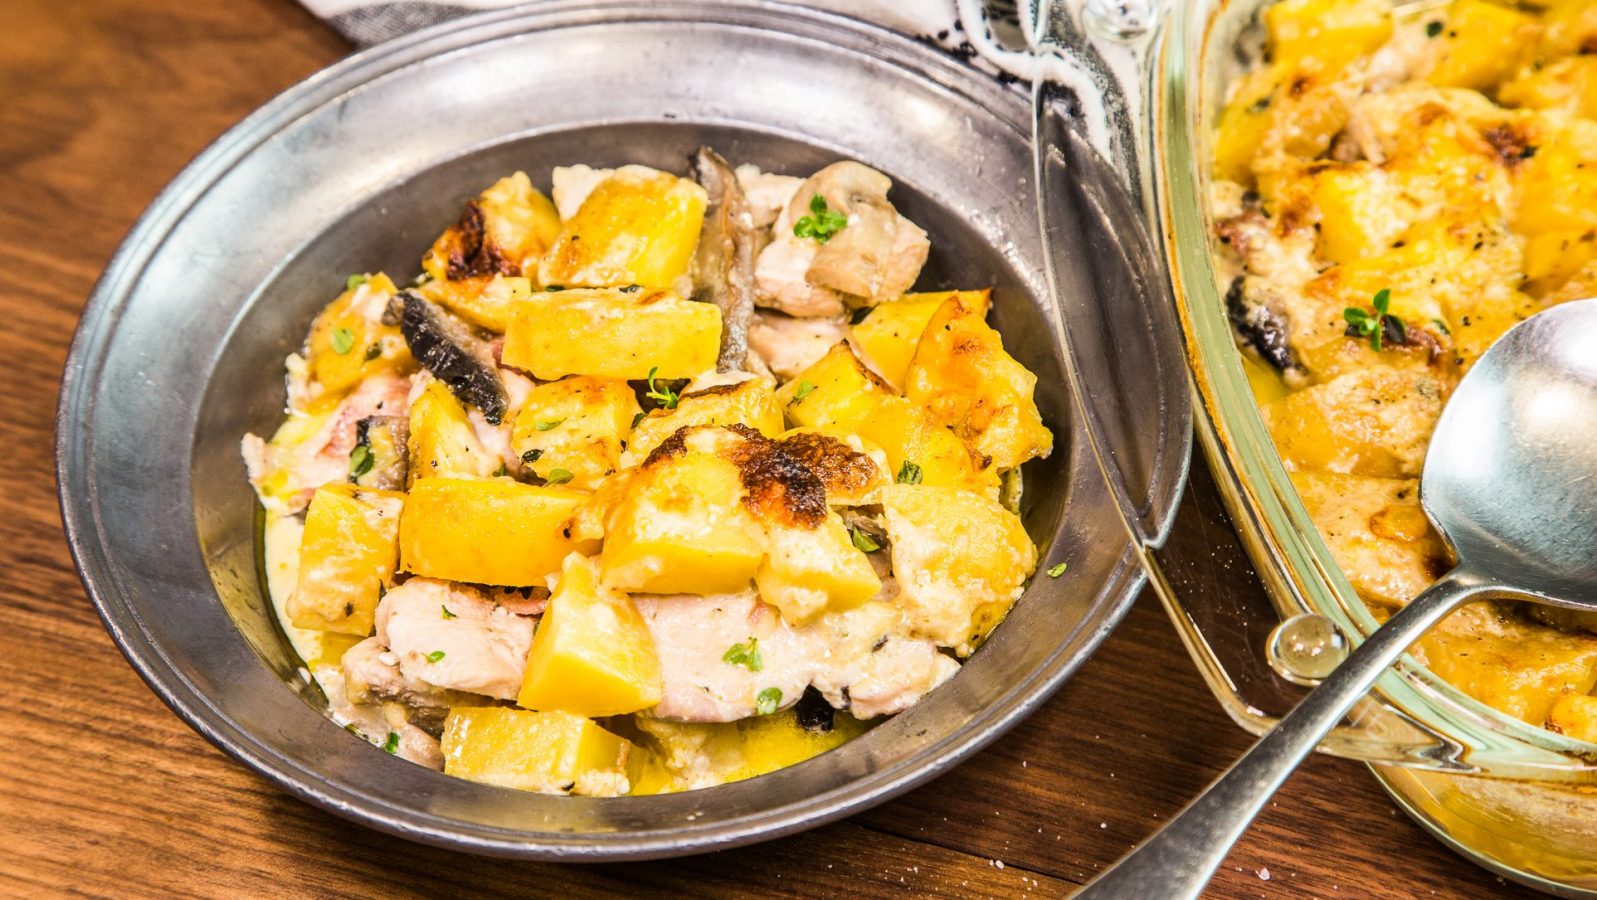 A serving bowl and a glass oven baking dish full of yellow potato bake with a spoon.